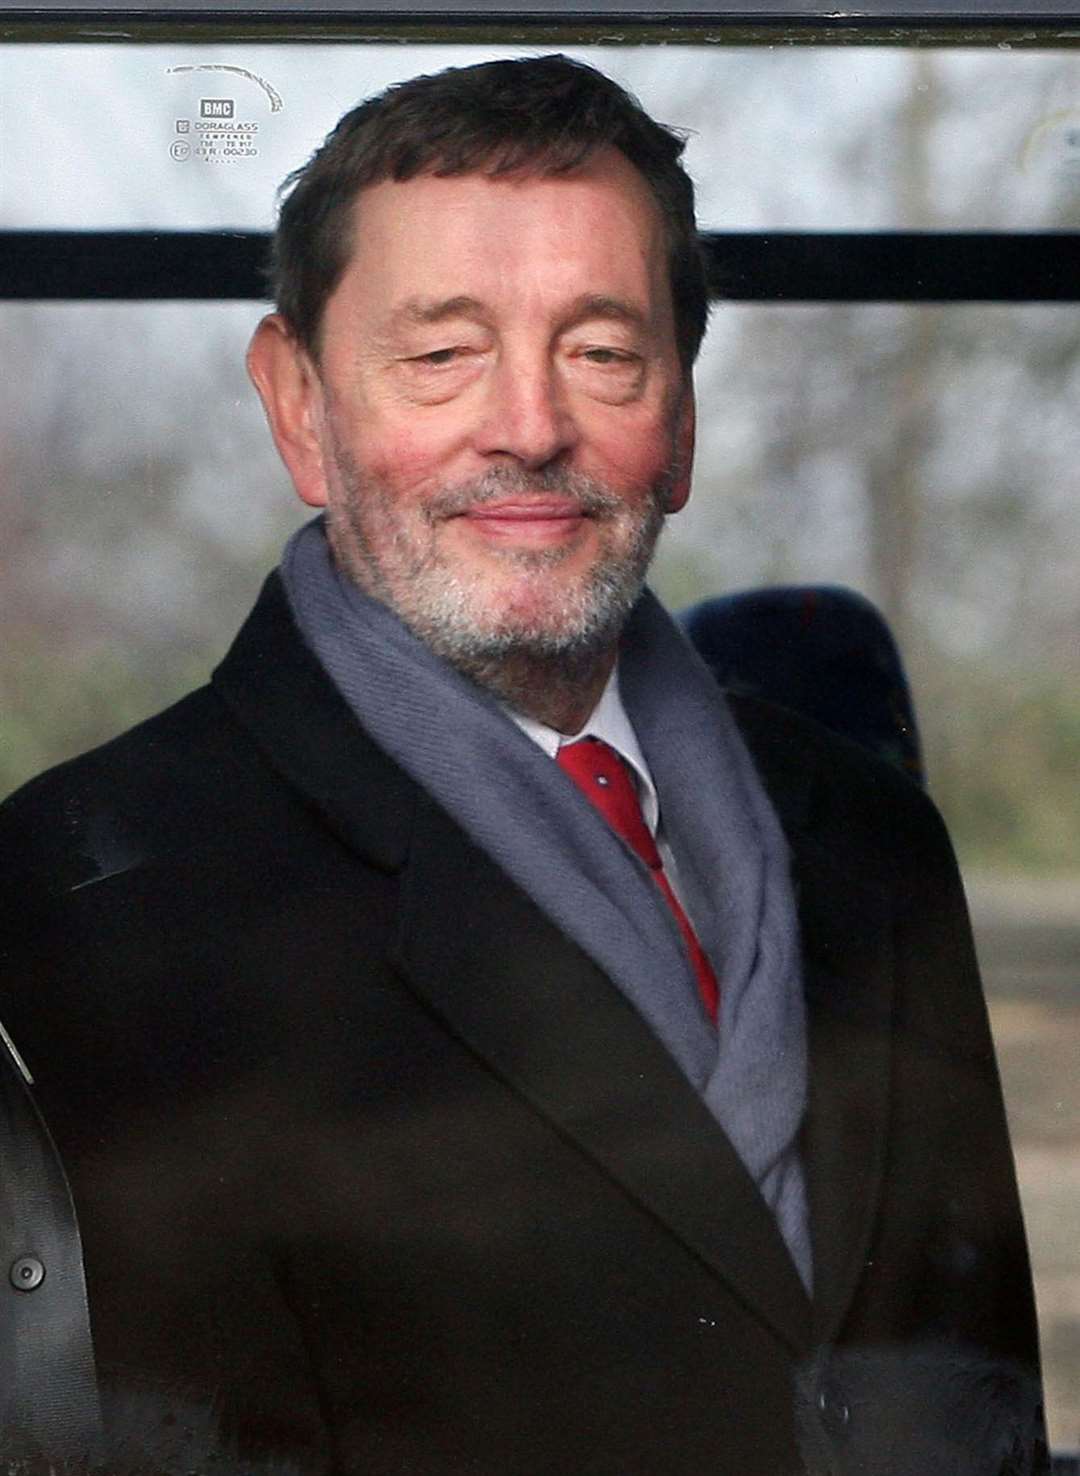 Labour former Labour minister Lord Blunkett (David Cheskin/PA)